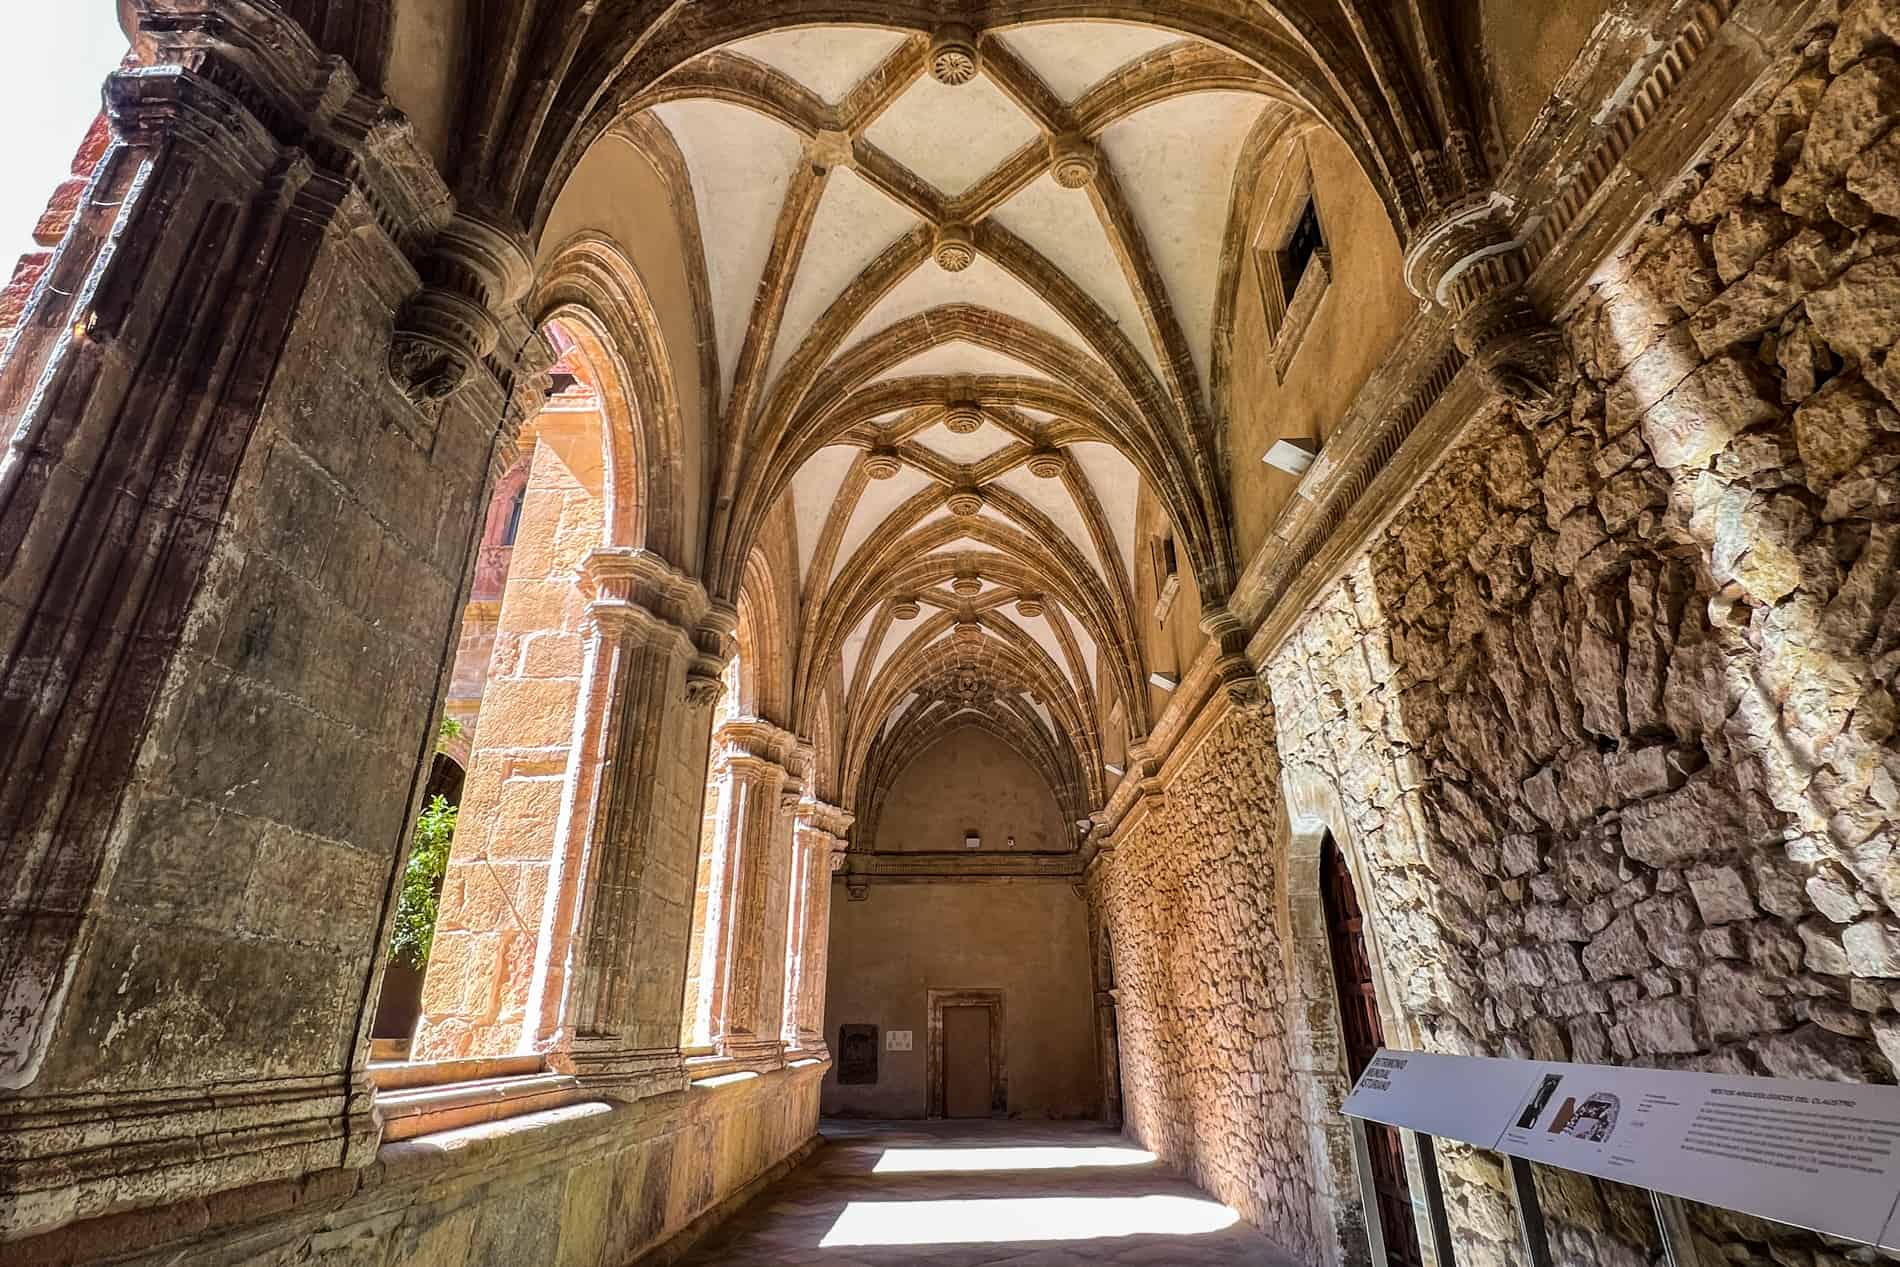 The stone-walled, vaulted ceilings of the cloister inside the Museo Arqueológico de Asturias (Archaeological Museum of Asturias) in Oviedo. 